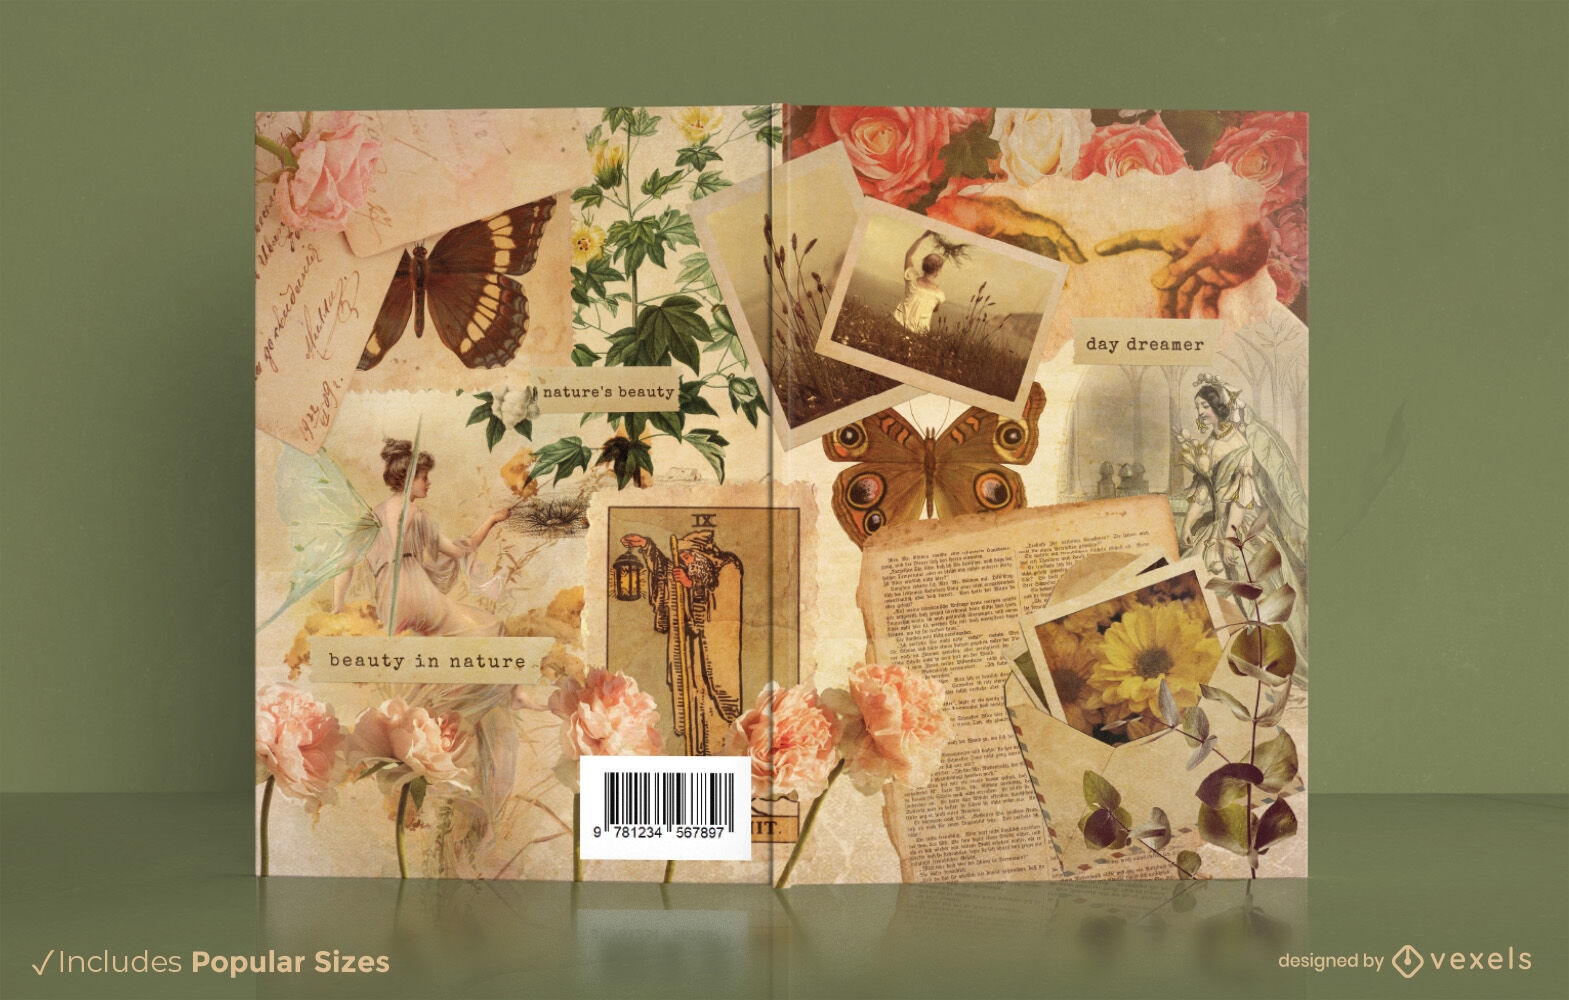 Fairytale butterflies and flowers book cover design